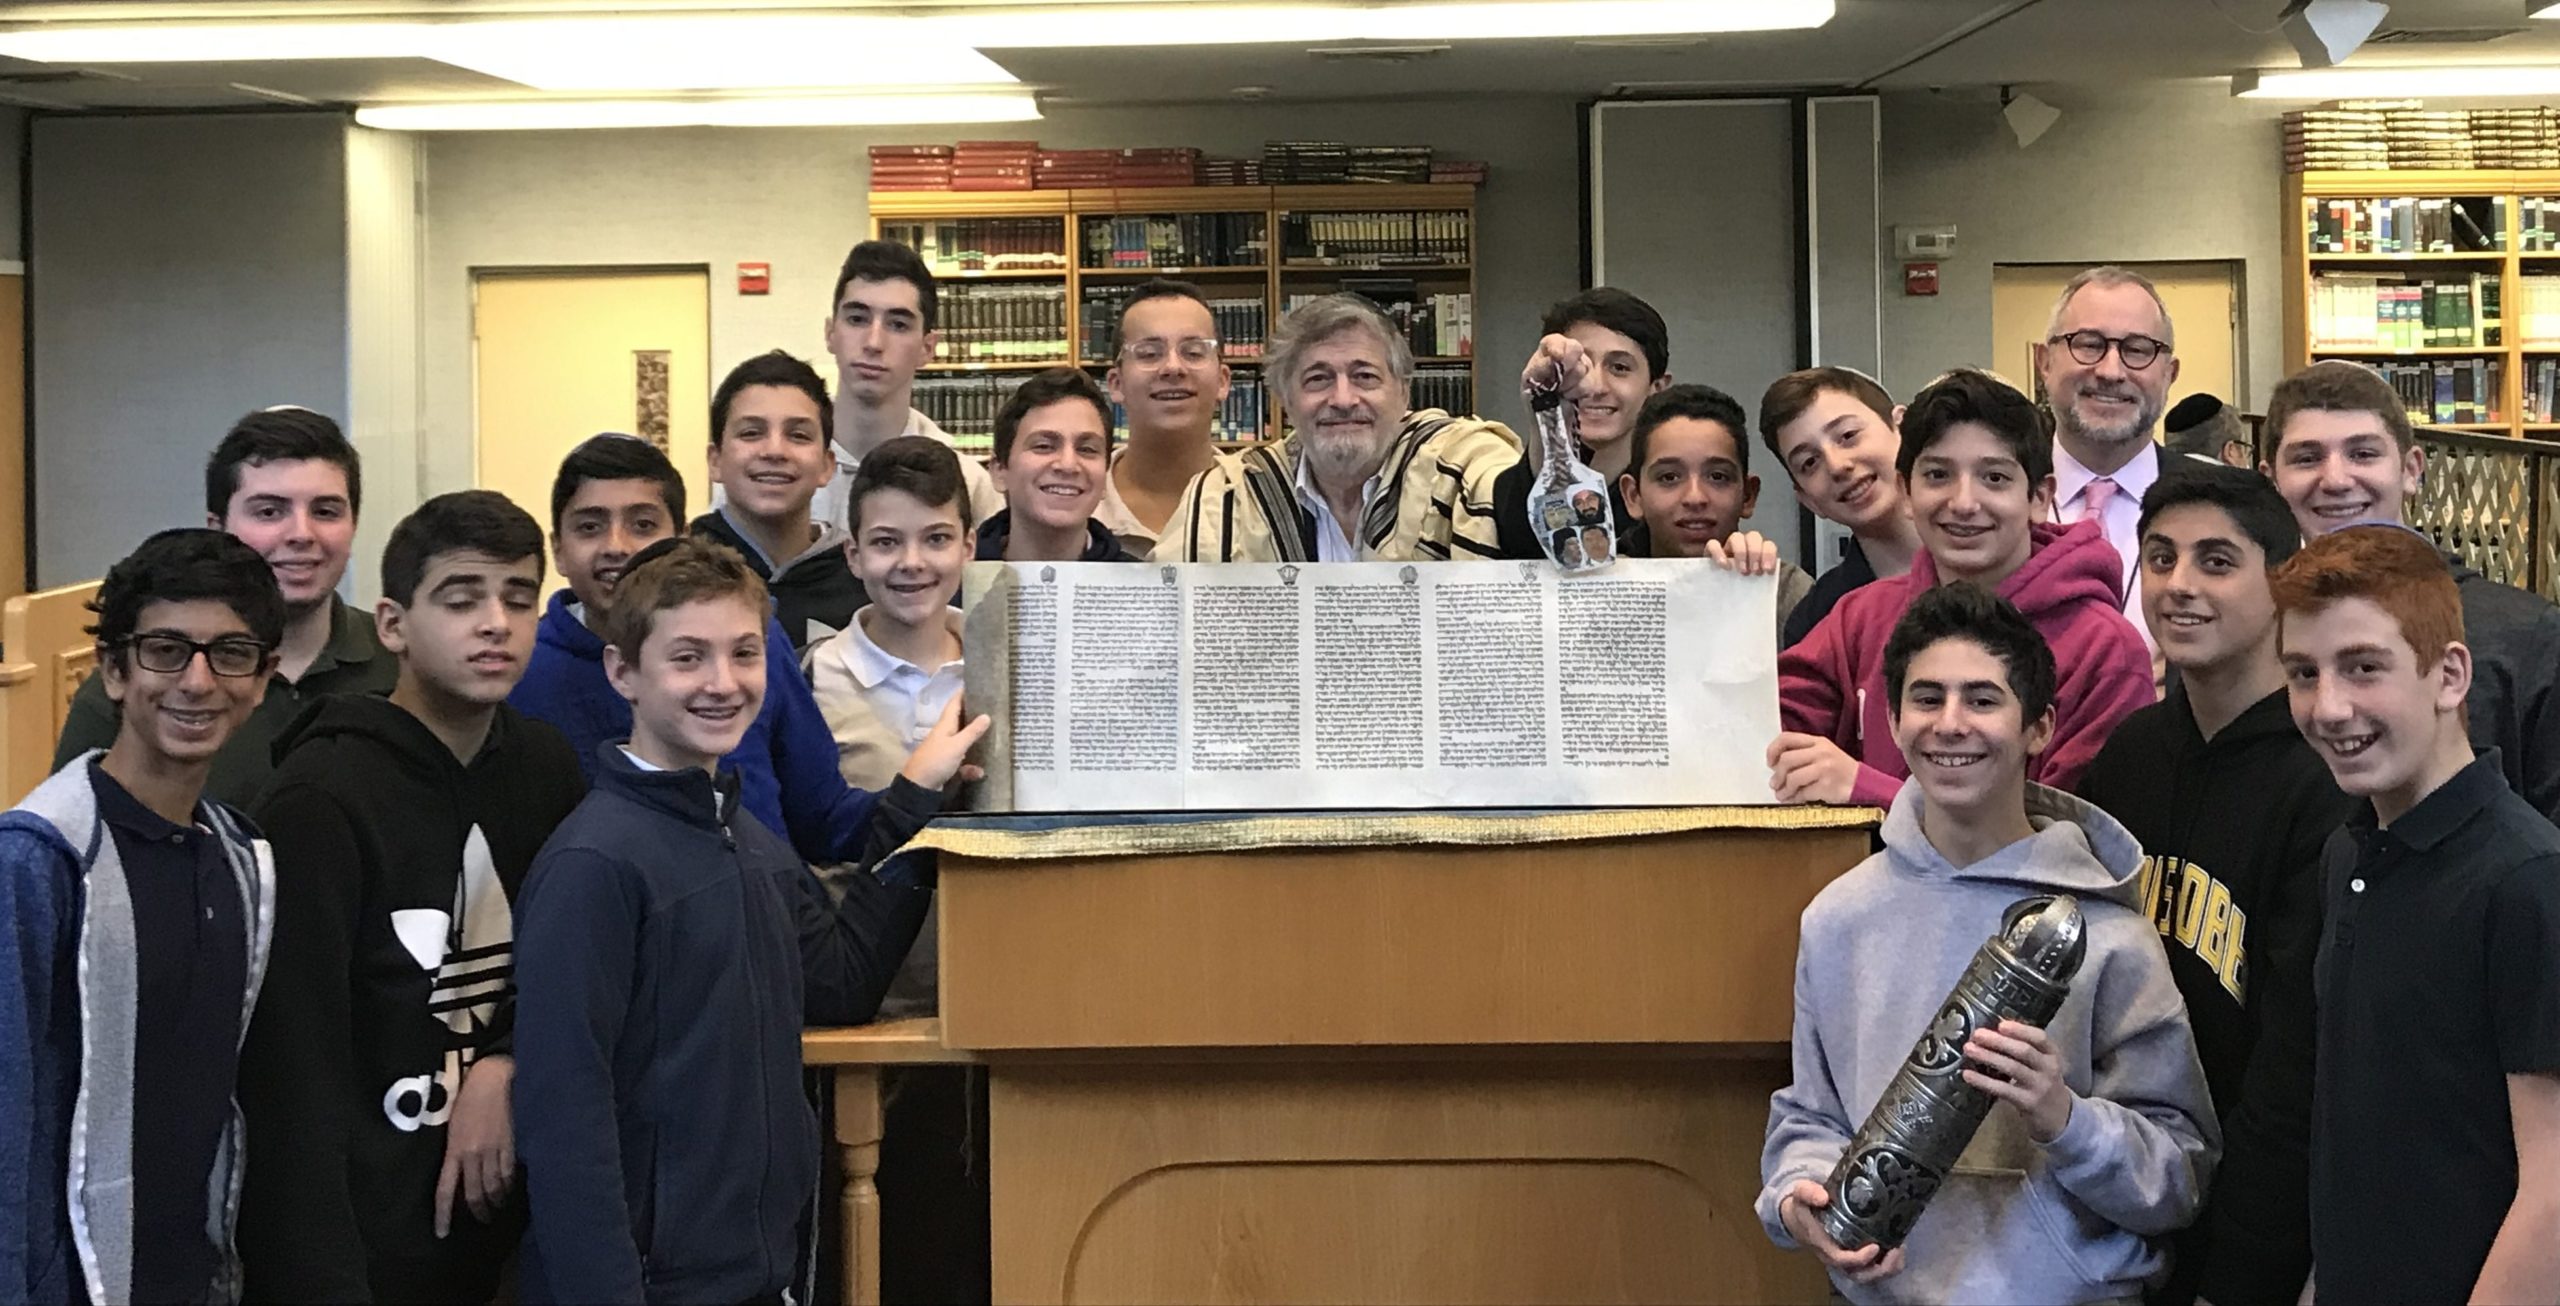 Several students from North Shore Hebrew Academy have gained the skill needed to recite the Book of Esther at Great Neck Synagogue from Paul Brody. (Photo courtesy of Paul Brody)